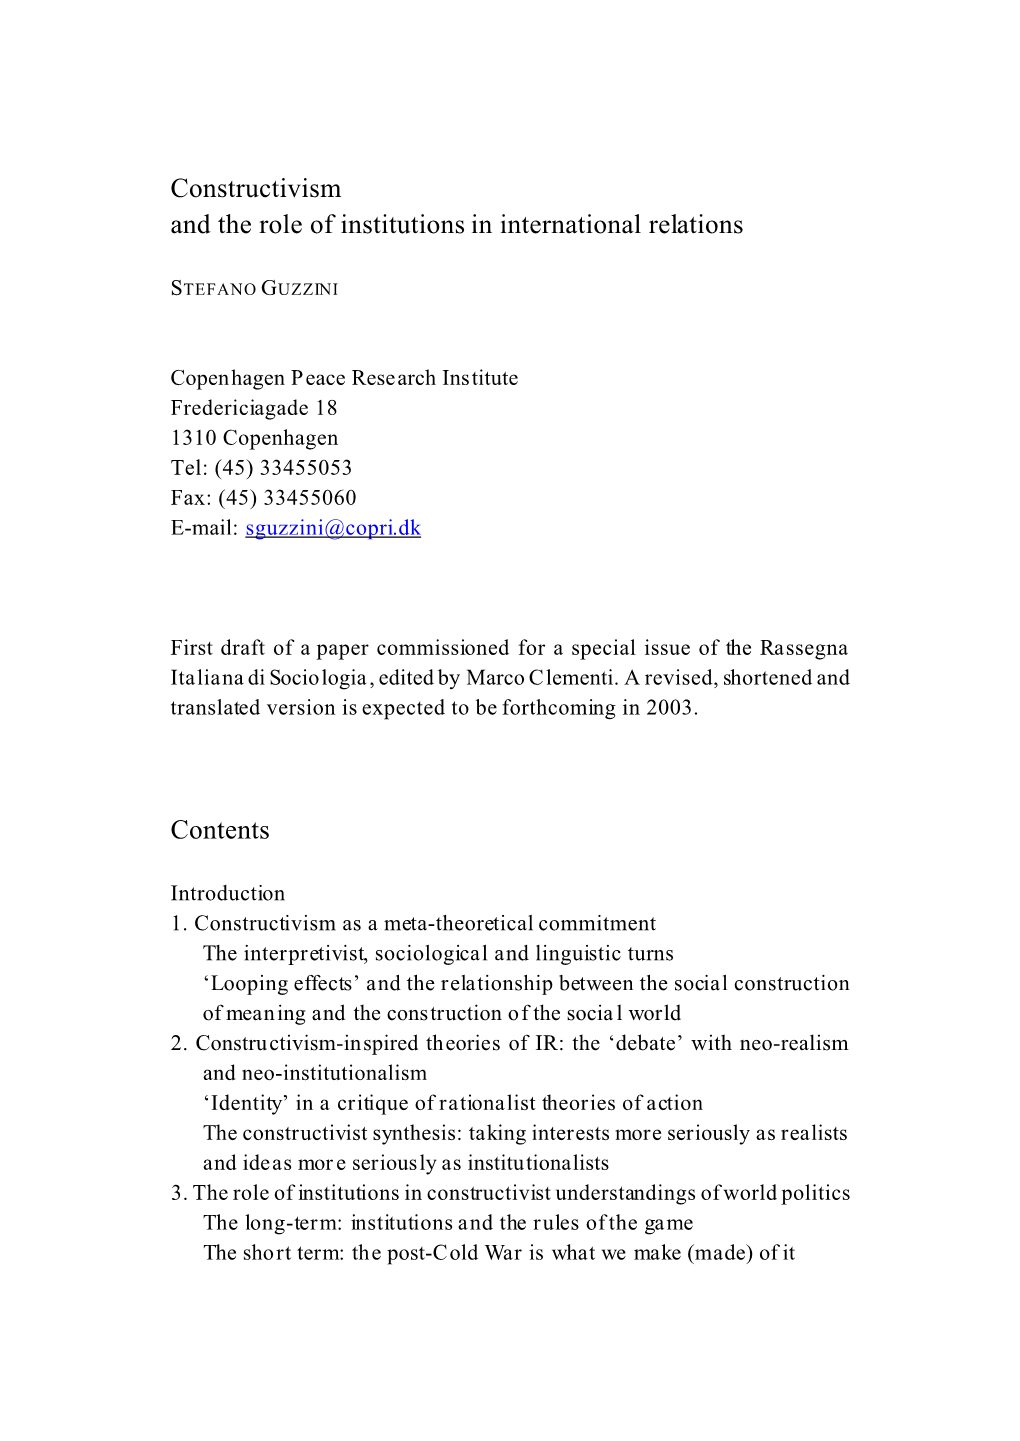 Constructivism and the Role of Institutions in International Relations